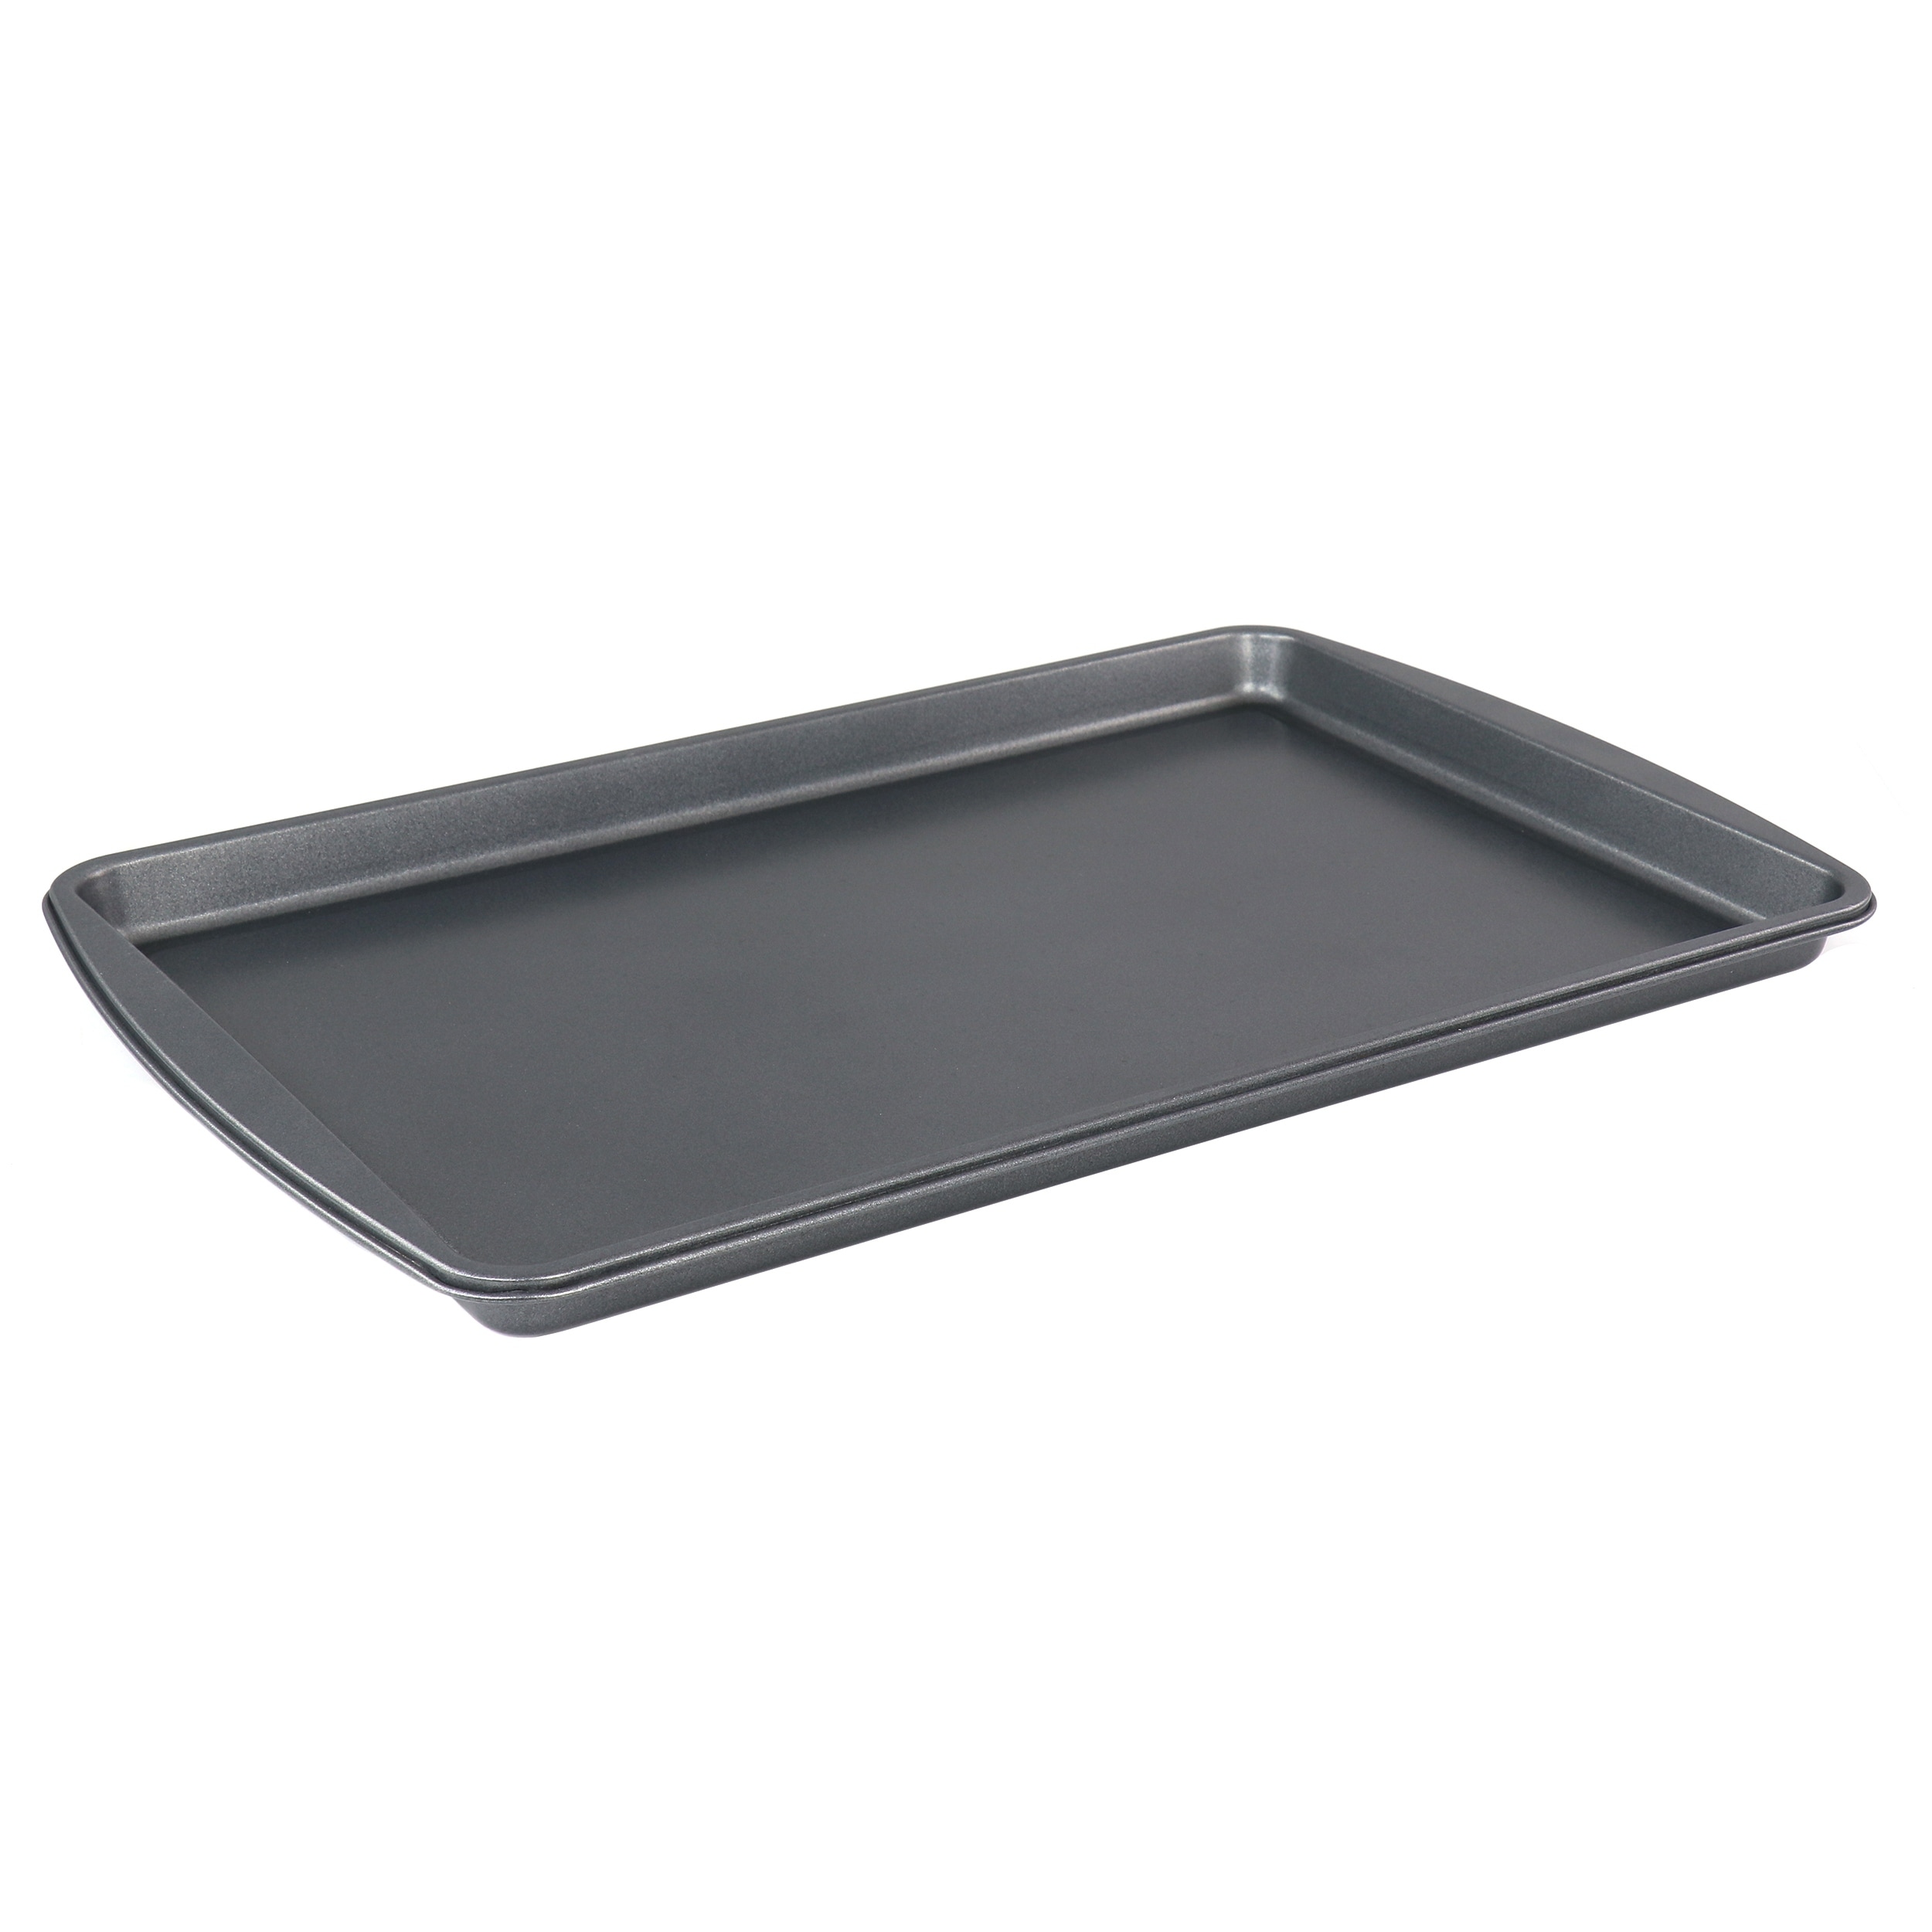 Nordic Ware Nonstick High-Sided Oven Crisp Baking Tray,Gold